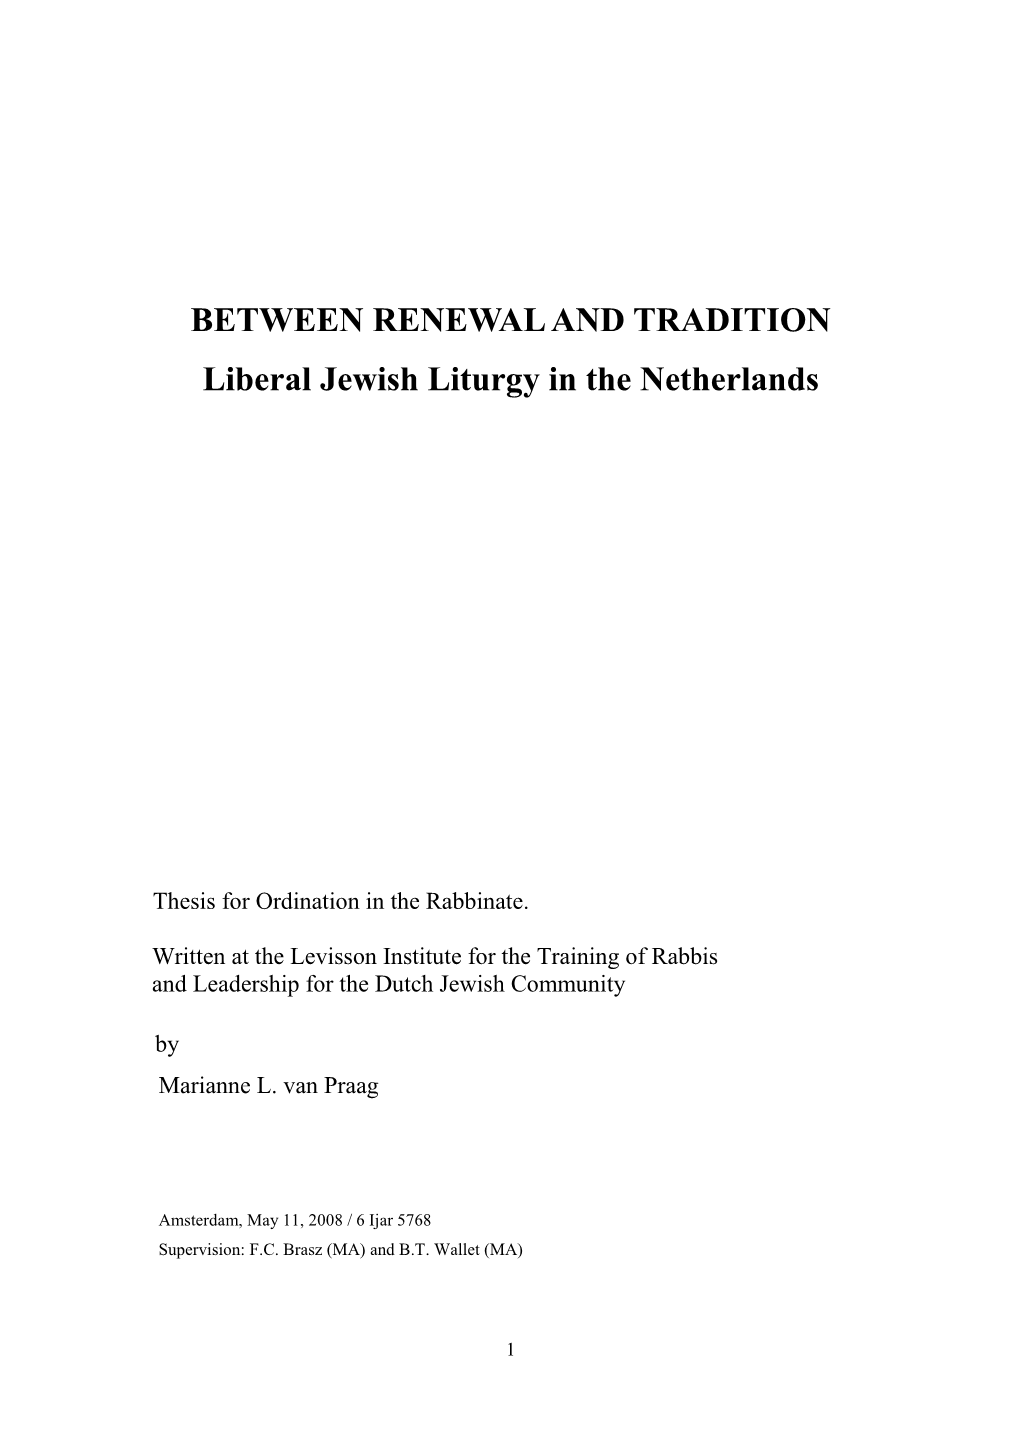 BETWEEN RENEWAL and TRADITION Liberal Jewish Liturgy in the Netherlands